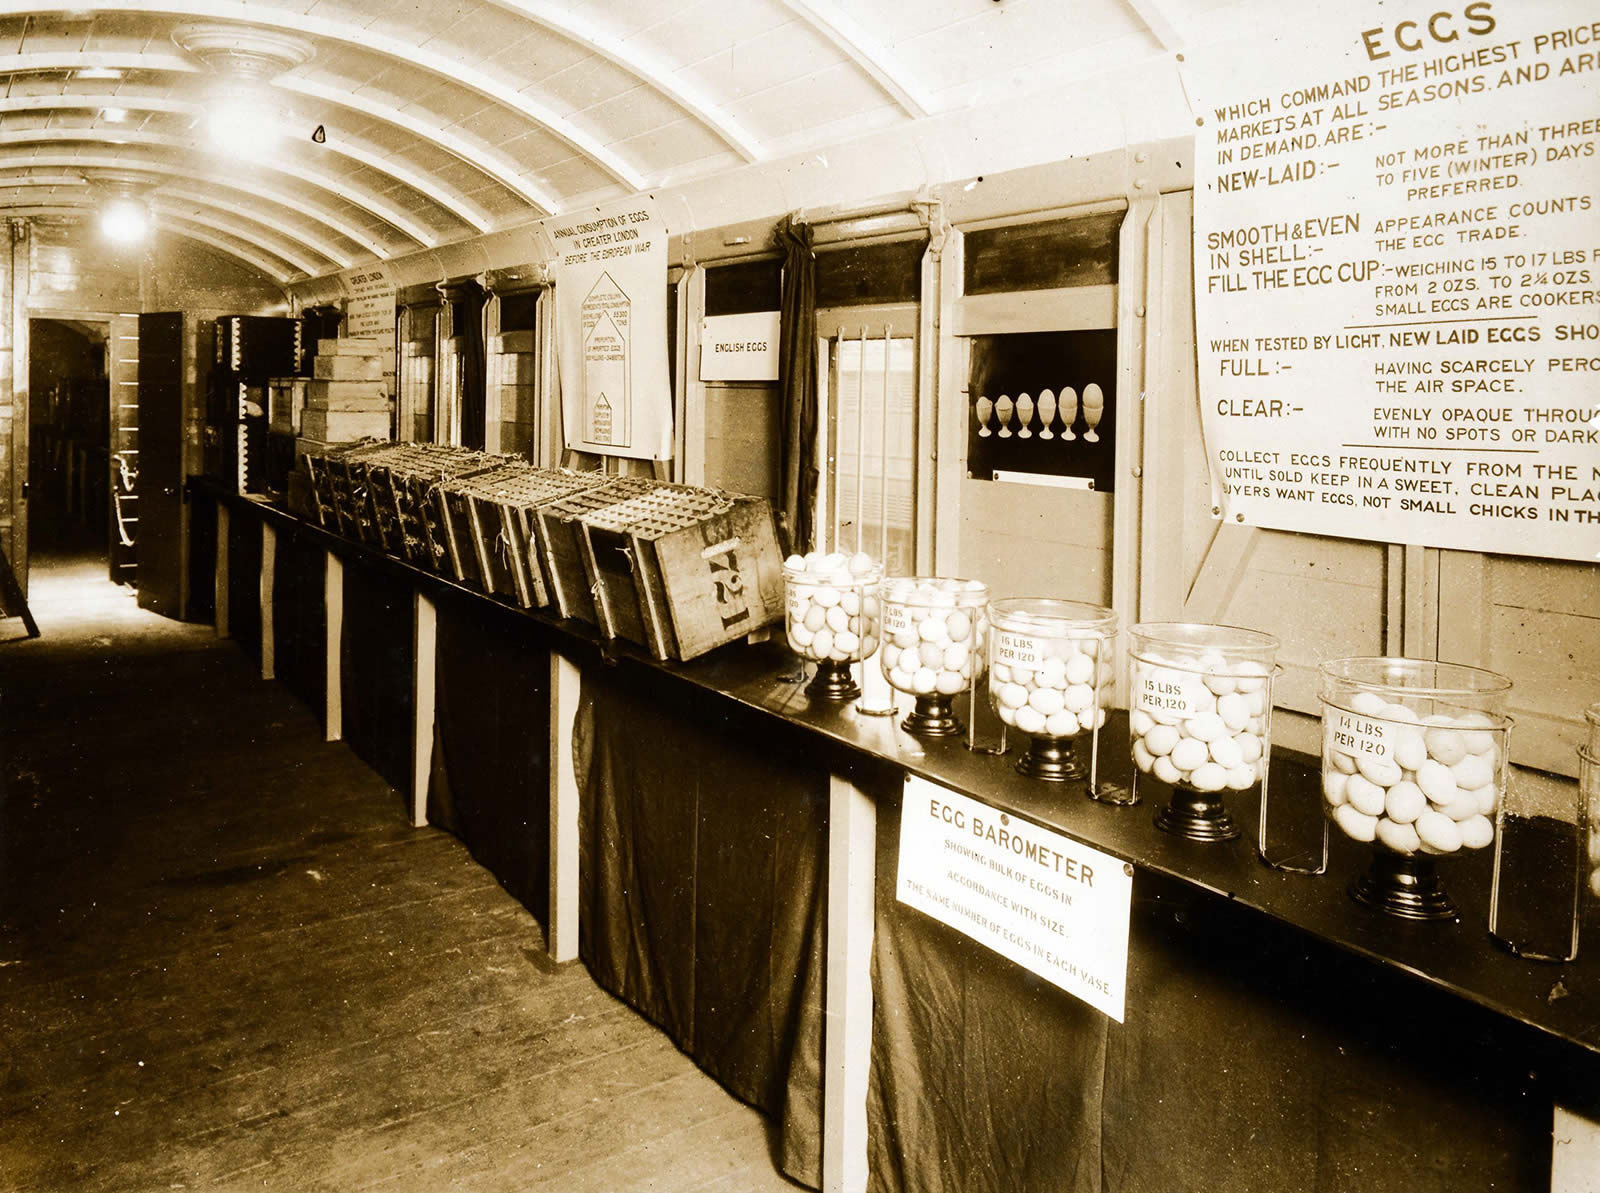 Image of the interior of the Egg and Poultry Demonstration Train RAIL 227_384 _3_October 1916